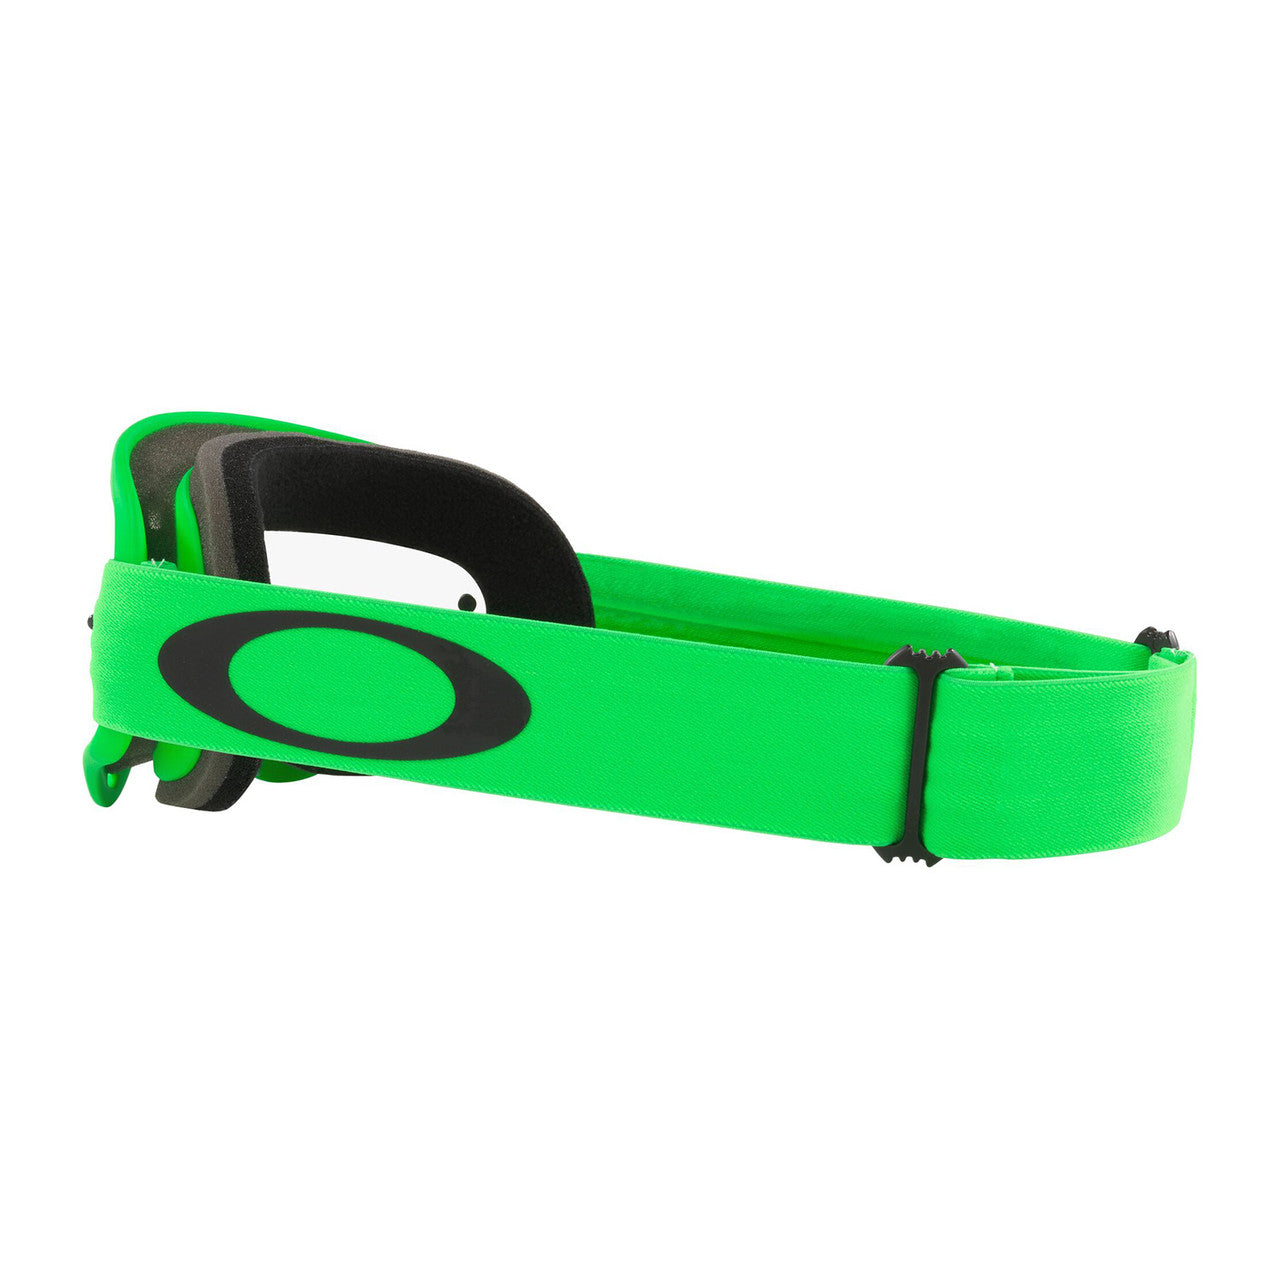 Oakley O Frame MX Goggles Clear Lens Various Colors